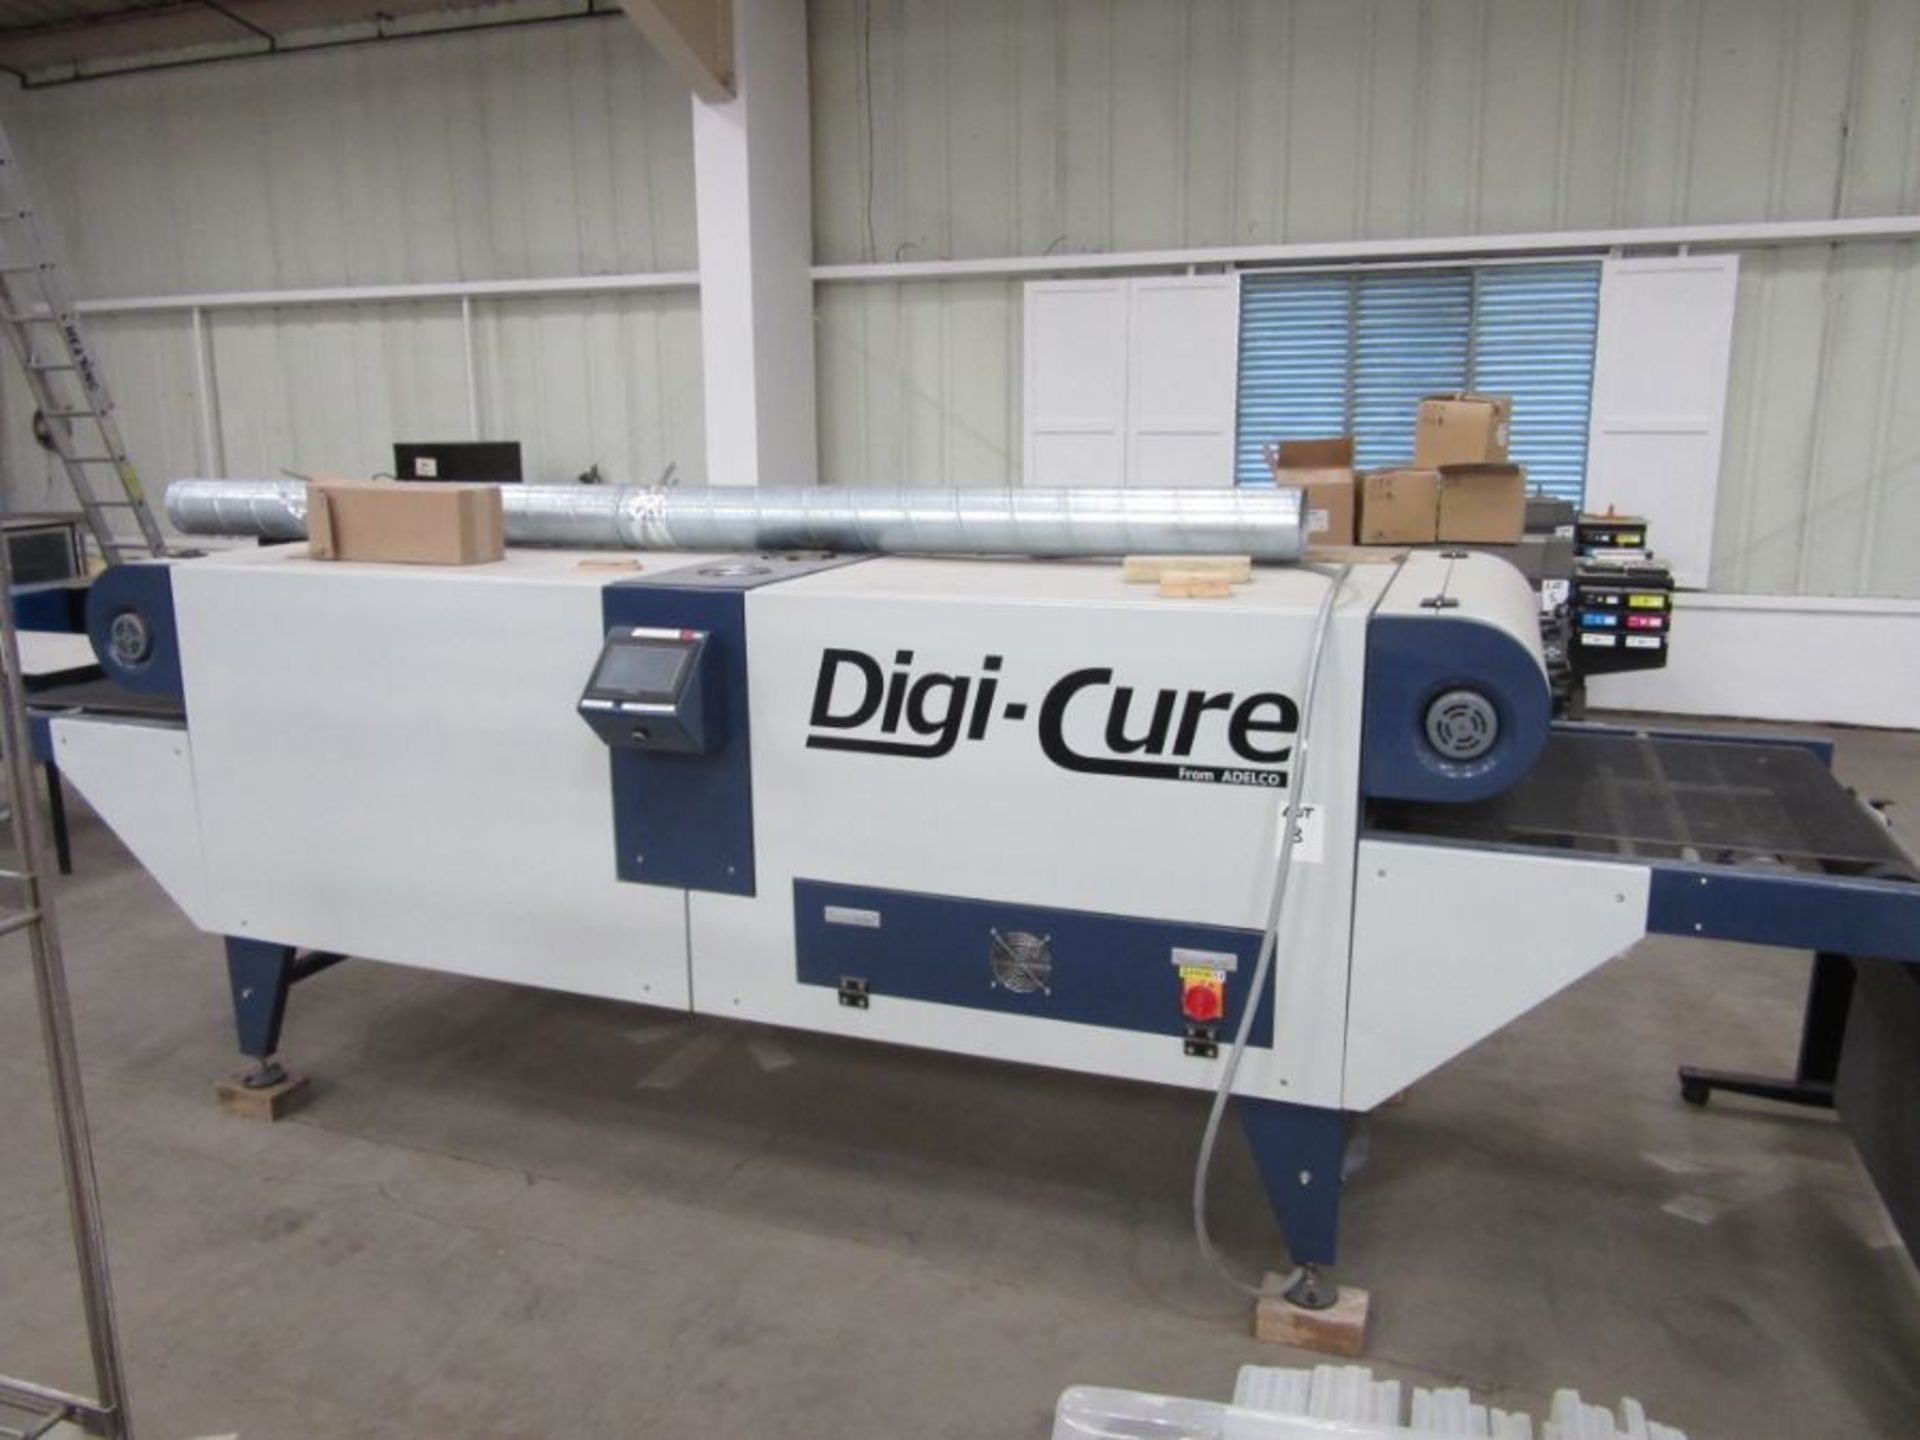 An Adelco Digi-Cure dryer